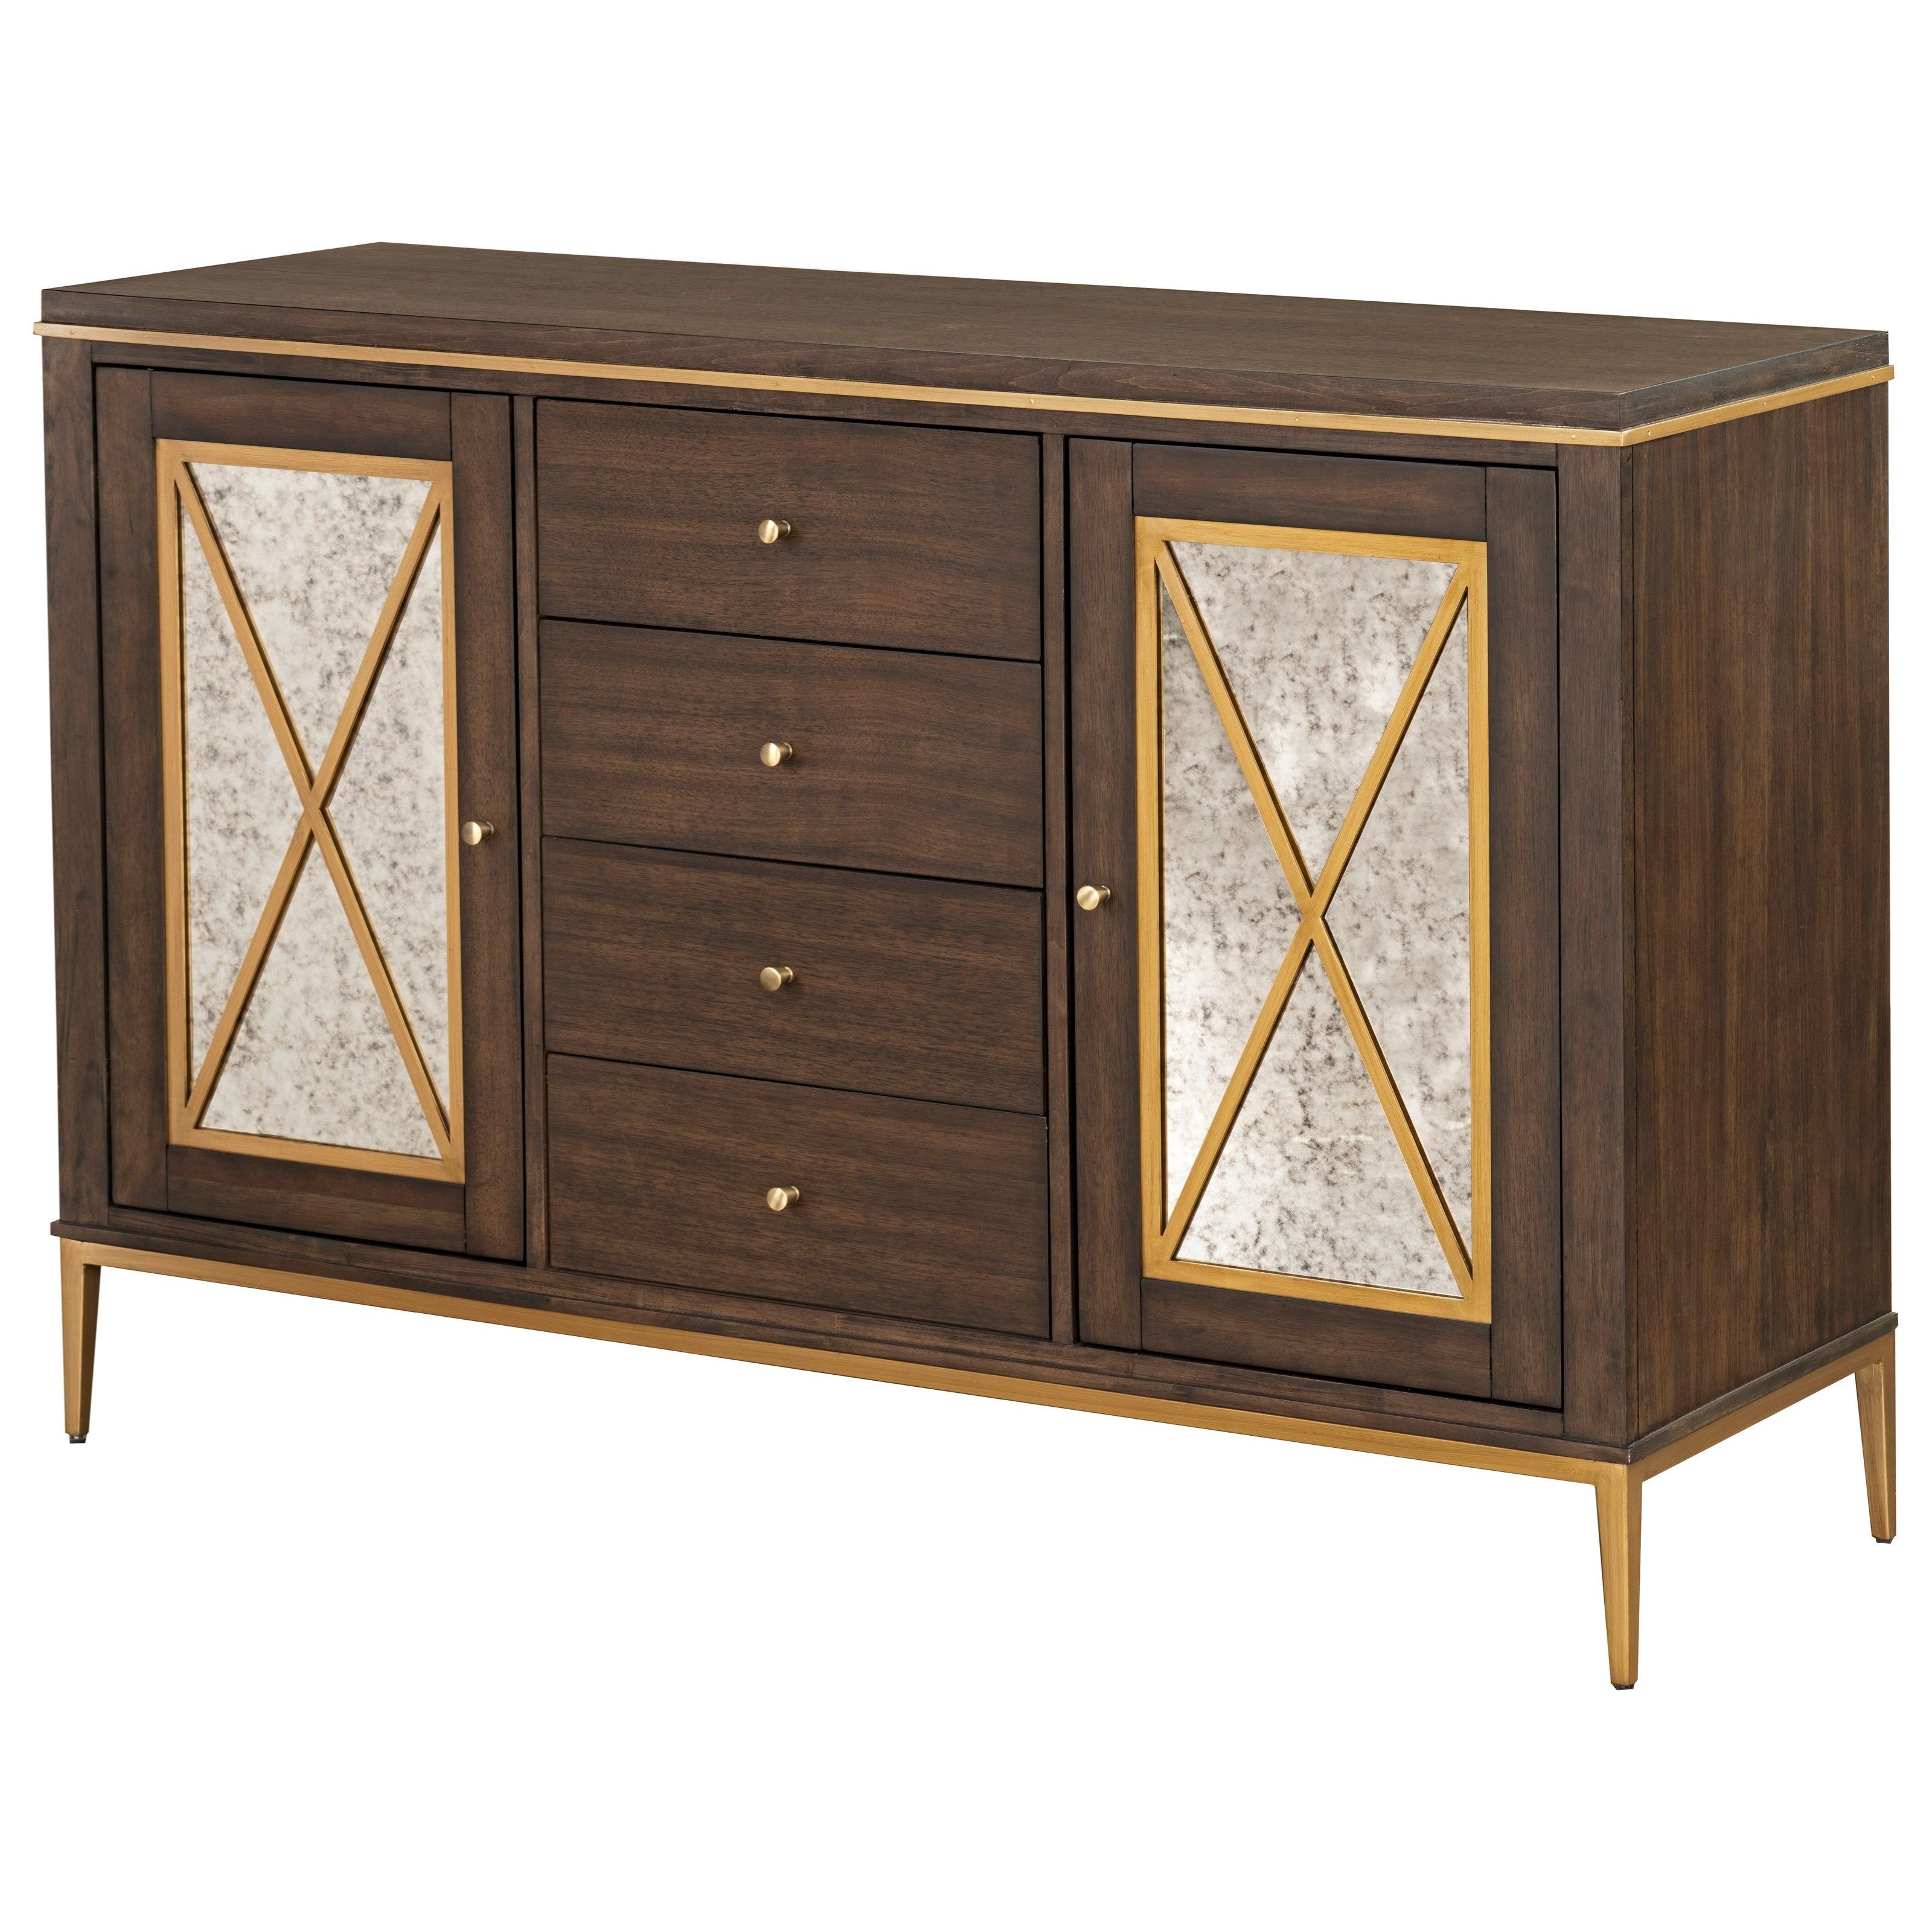 Standard Furniture Nathan 18582 Contemporary 2 Drawer And 4 Inside Contemporary Wooden Buffets With One Side Door Storage Cabinets And Two Drawers (View 13 of 20)